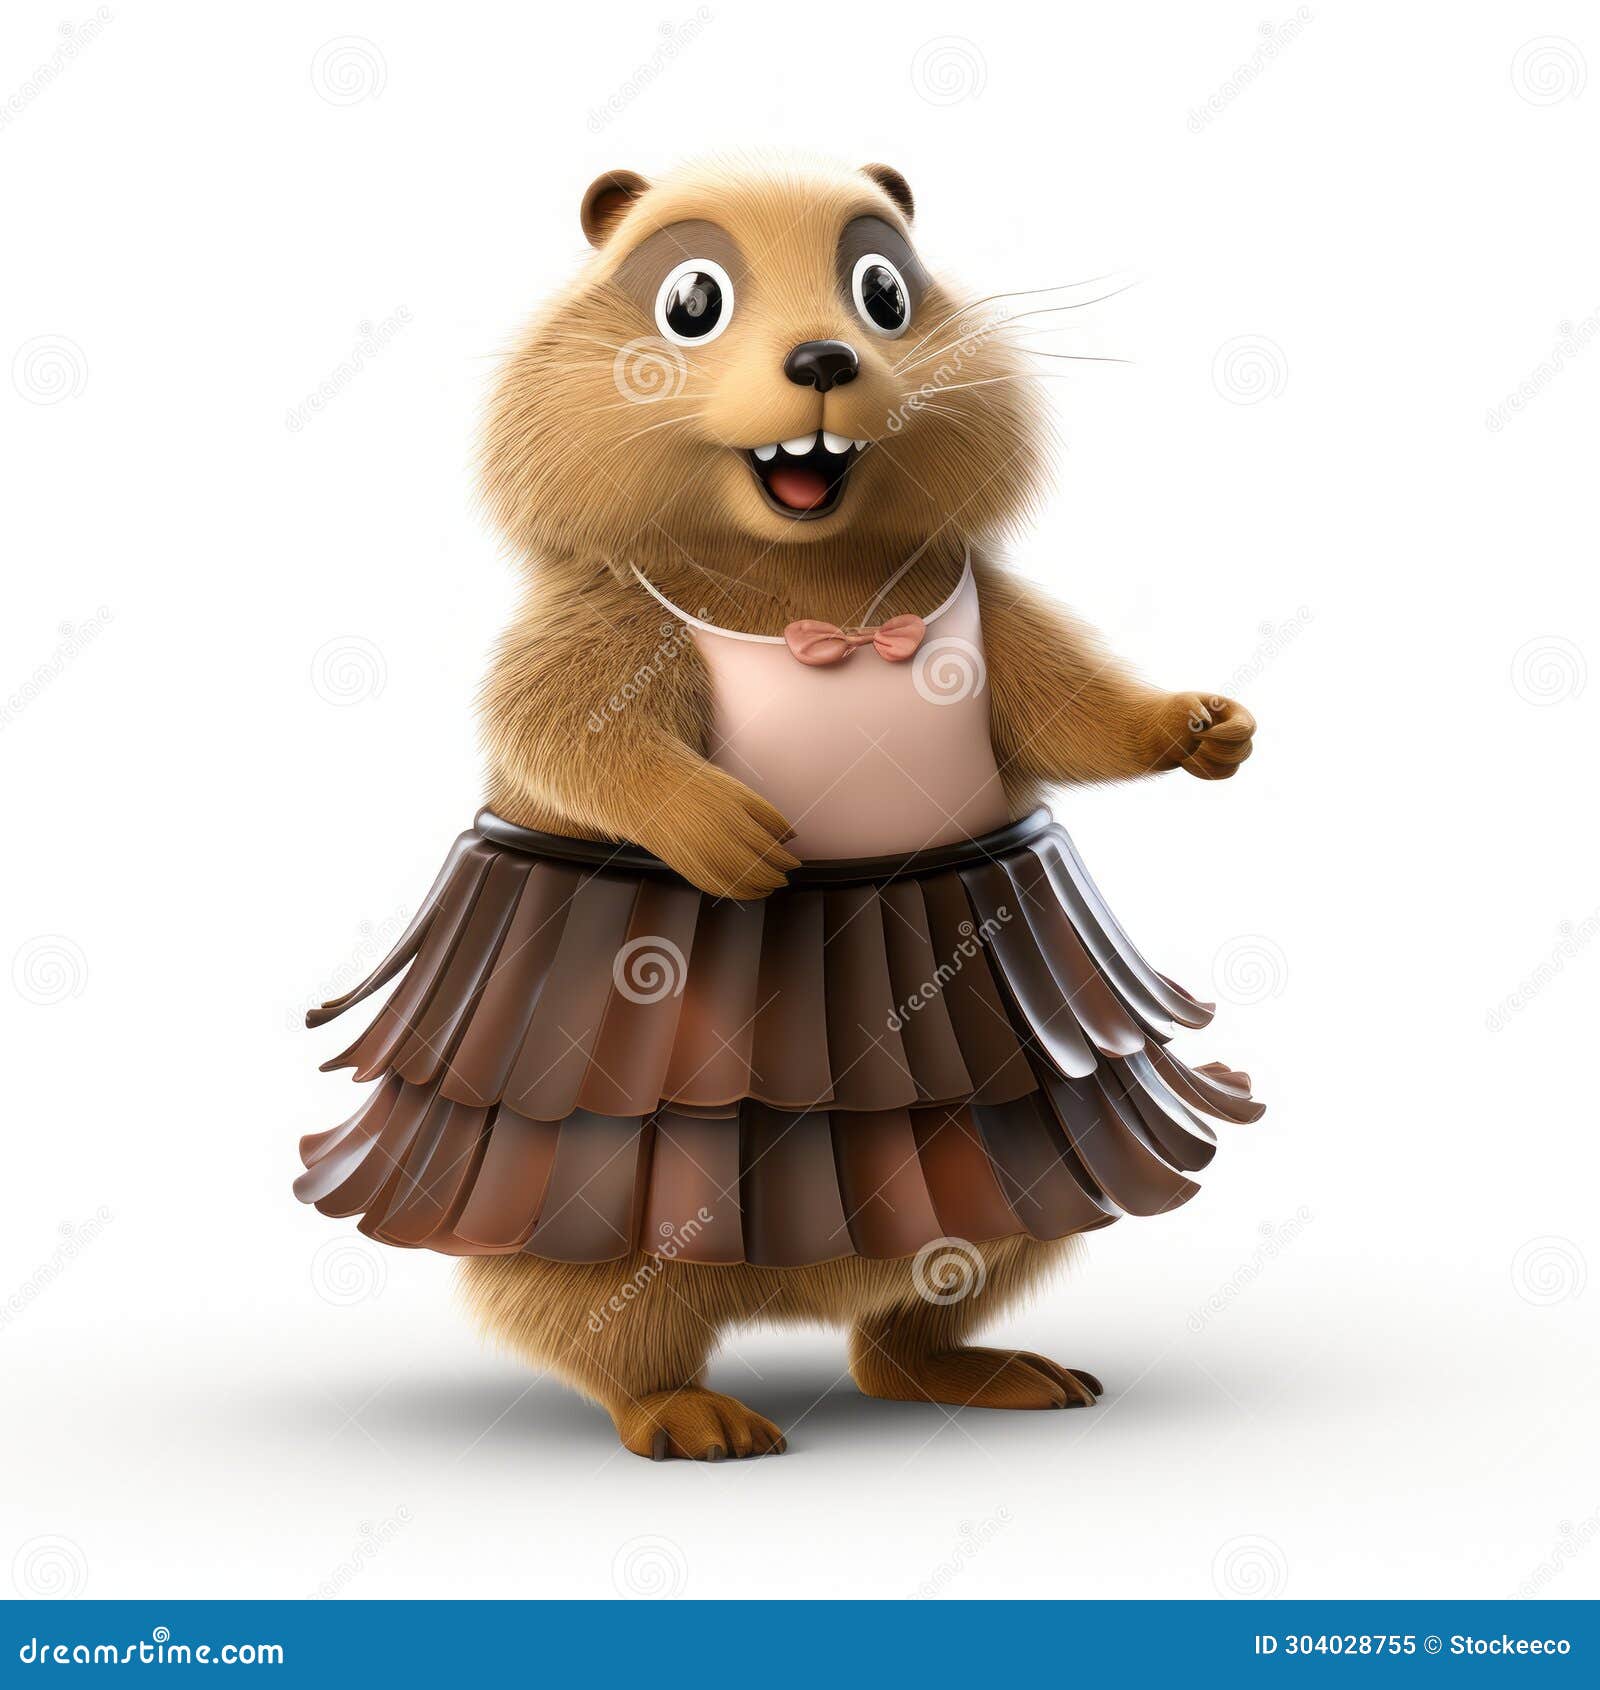 cute 3d cartoon groundhog in dress: silvestro lega style with lively movement